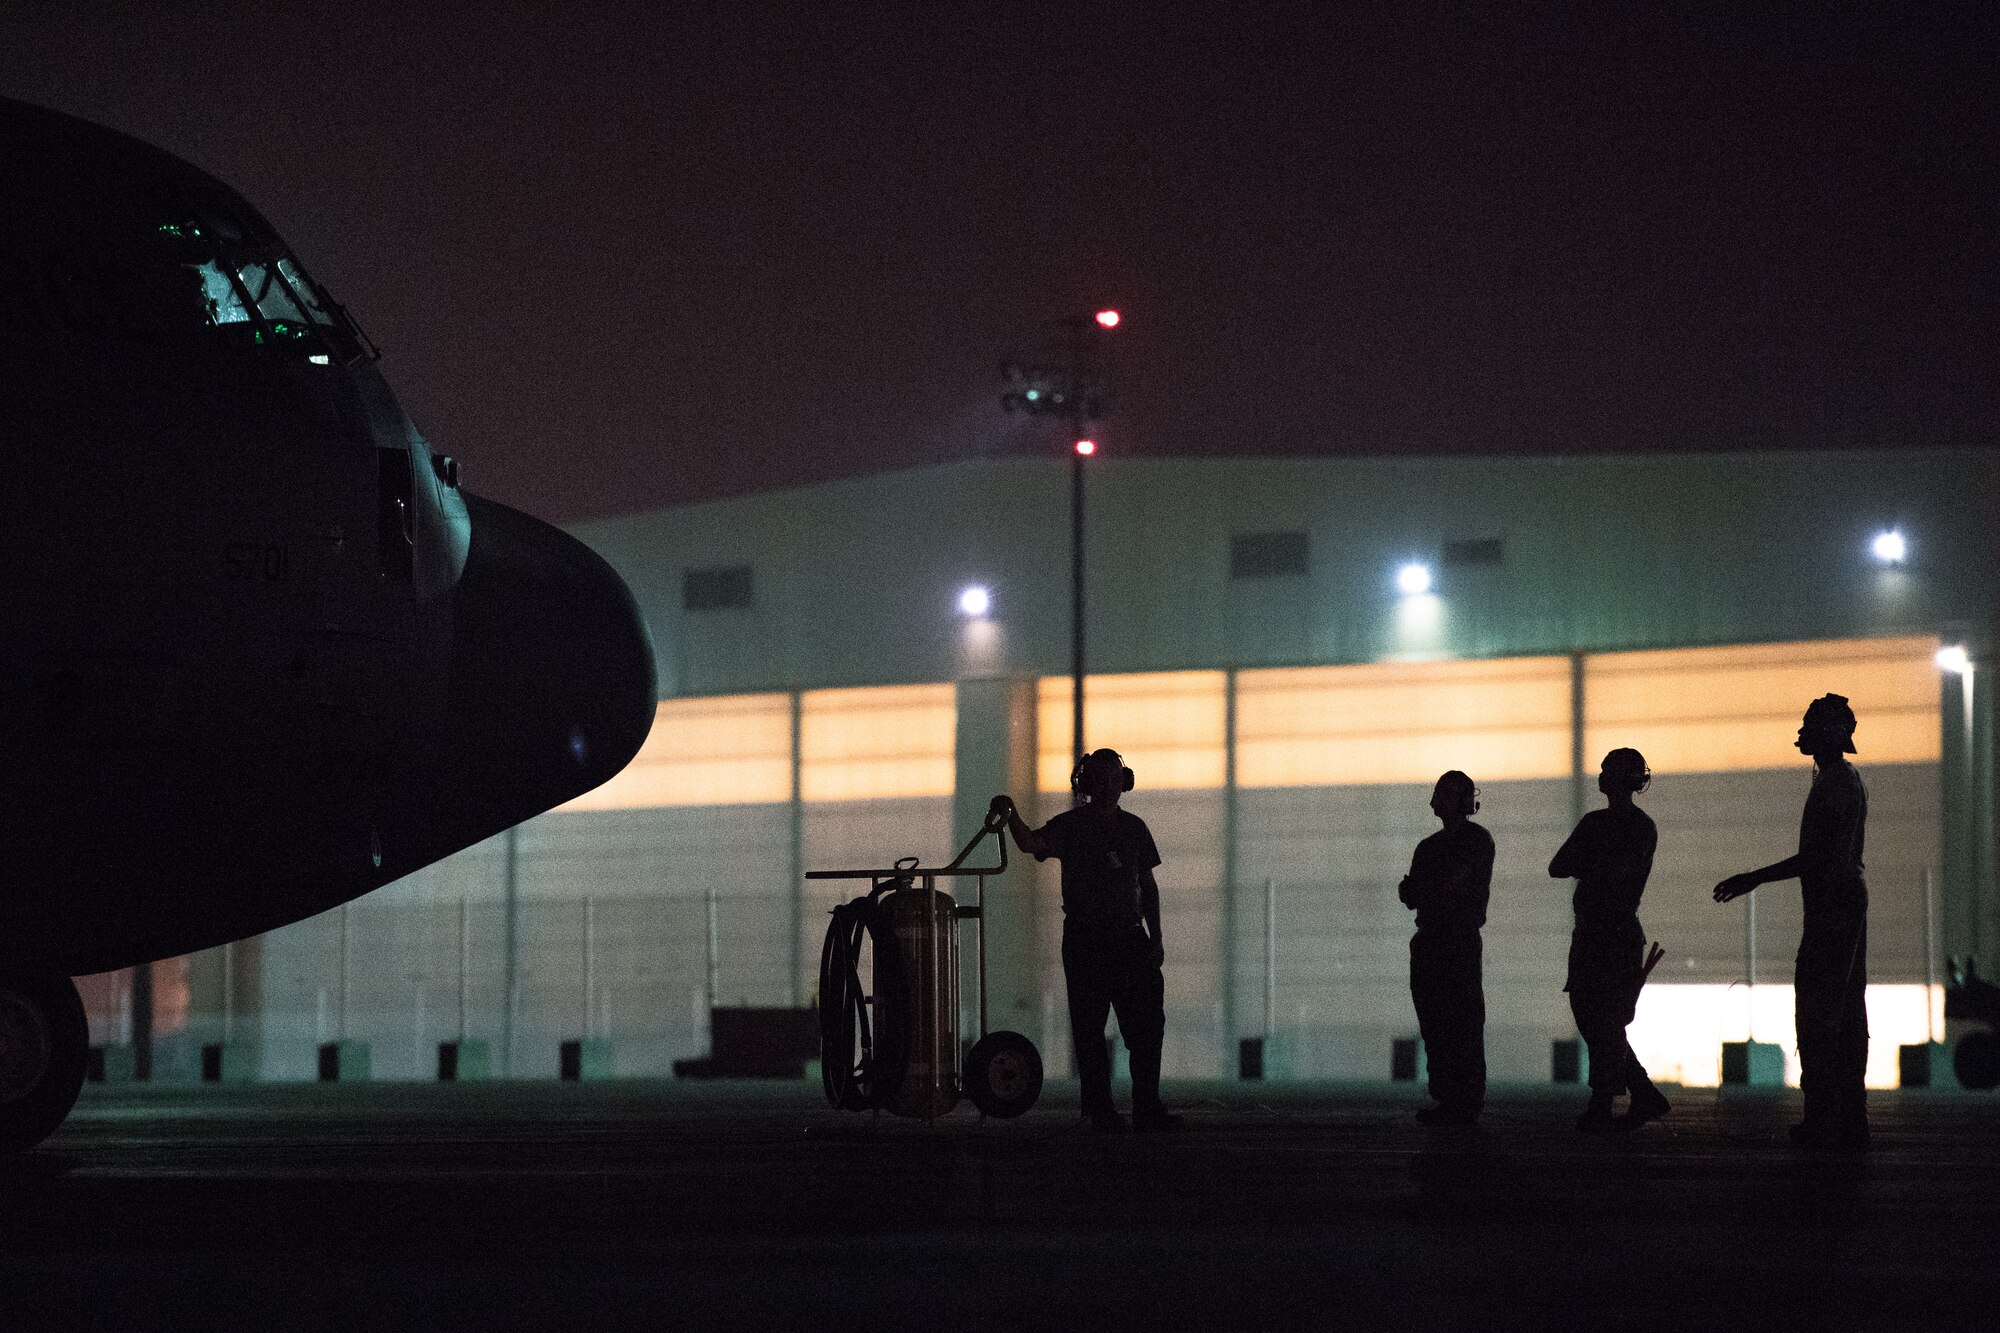 U.S. Air Force Airmen assigned to the 75th Expeditionary Airlift Squadron wait for further instruction before directing a C-130J Super Hercules on the flightline at Camp Lemonnier, Djibouti, June 5, 2019. The 75th EAS provides support in medical evacuations, disaster relief, humanitarian and airdrop operations. (U.S. Air Force photo by Staff Sgt. Devin Boyer)